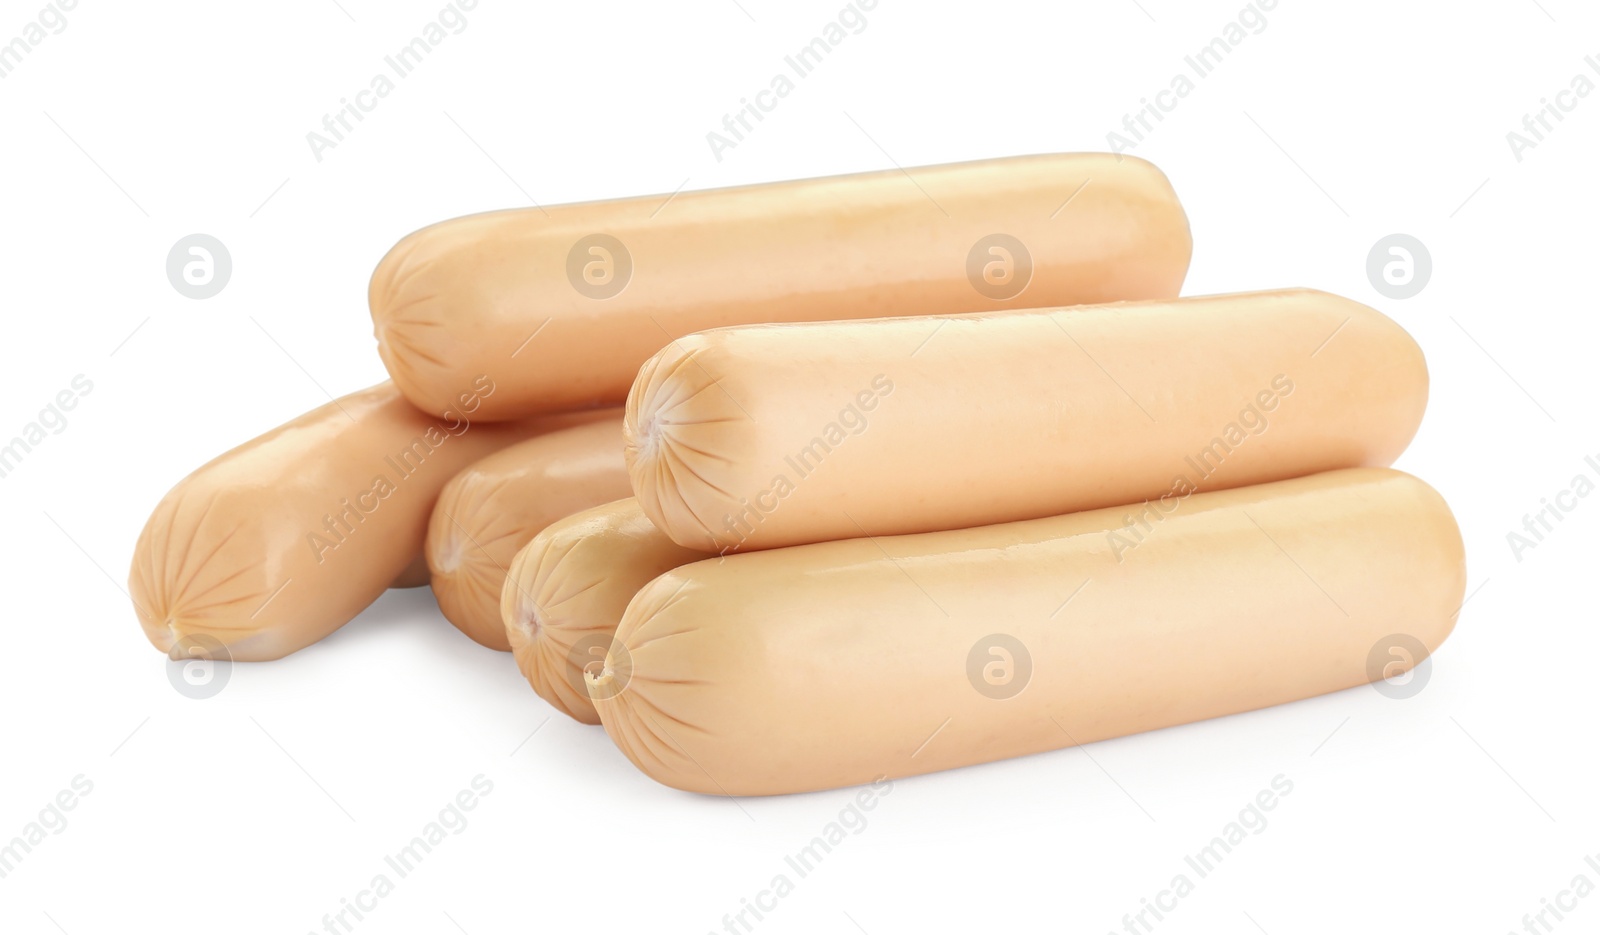 Photo of Fresh raw sausages isolated on white. Meat product